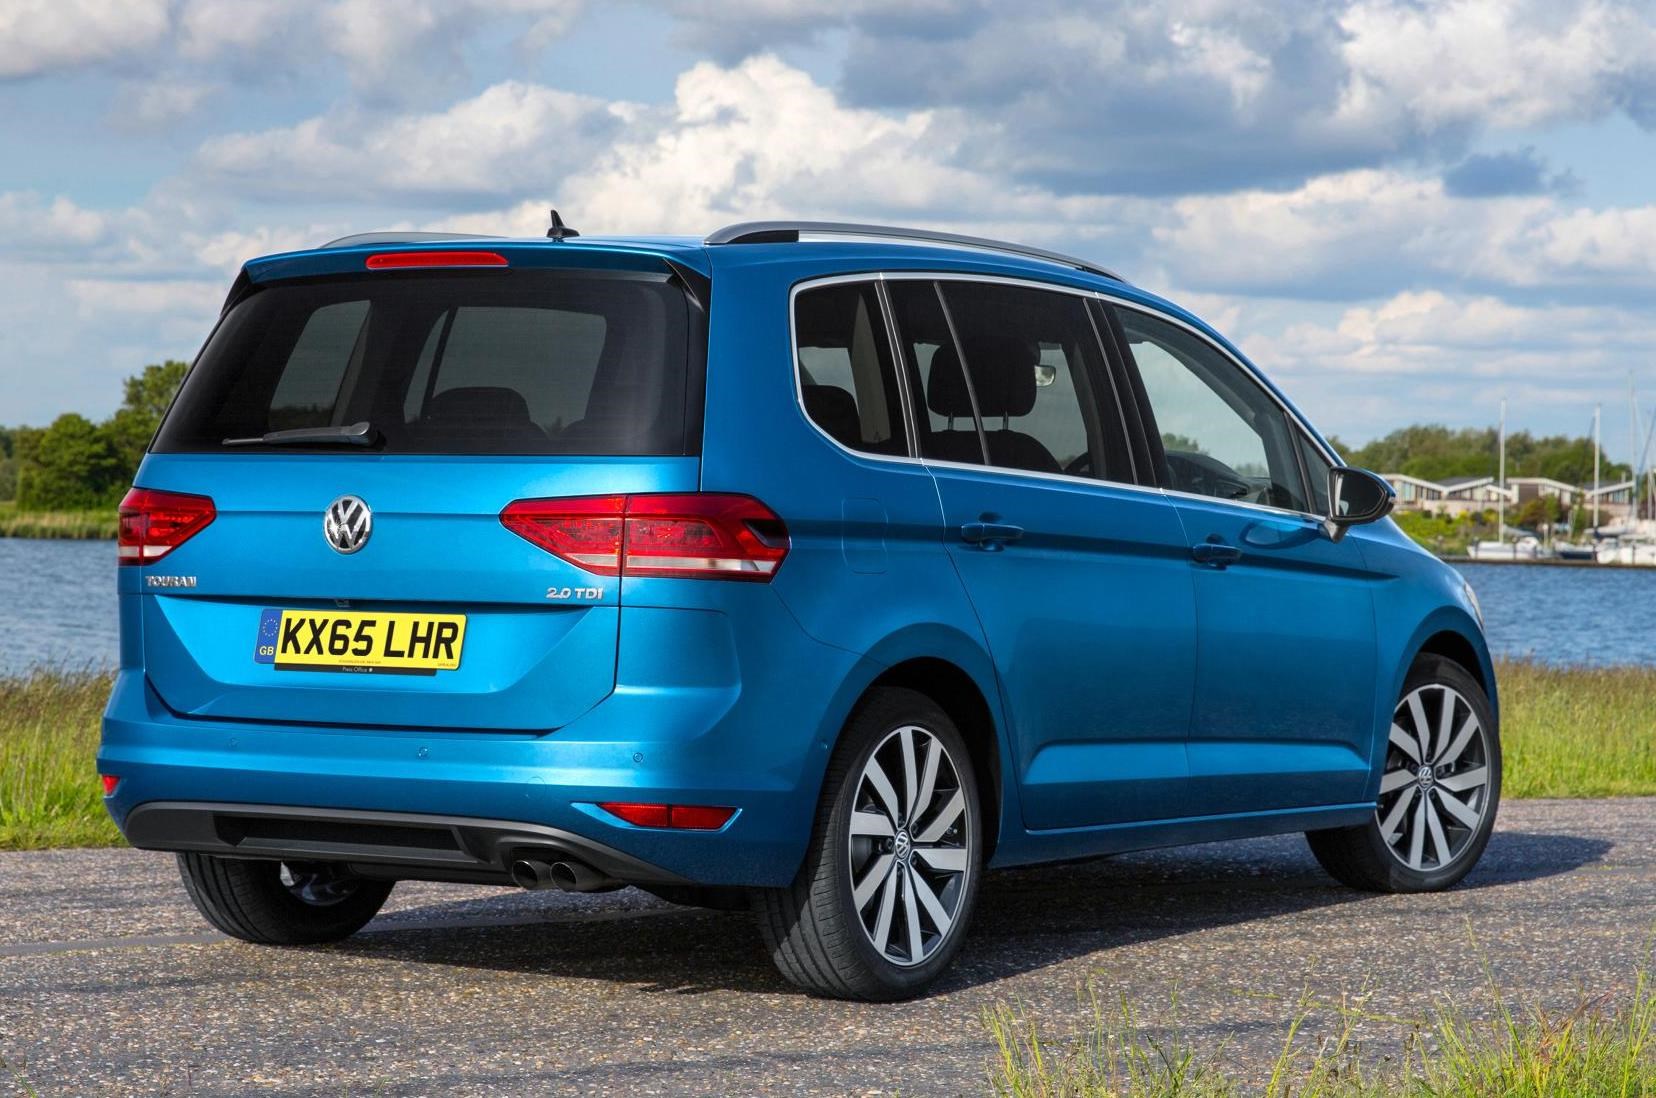 5 Reasons the Volkswagen Touran MPV is Your Family's New Dream Car